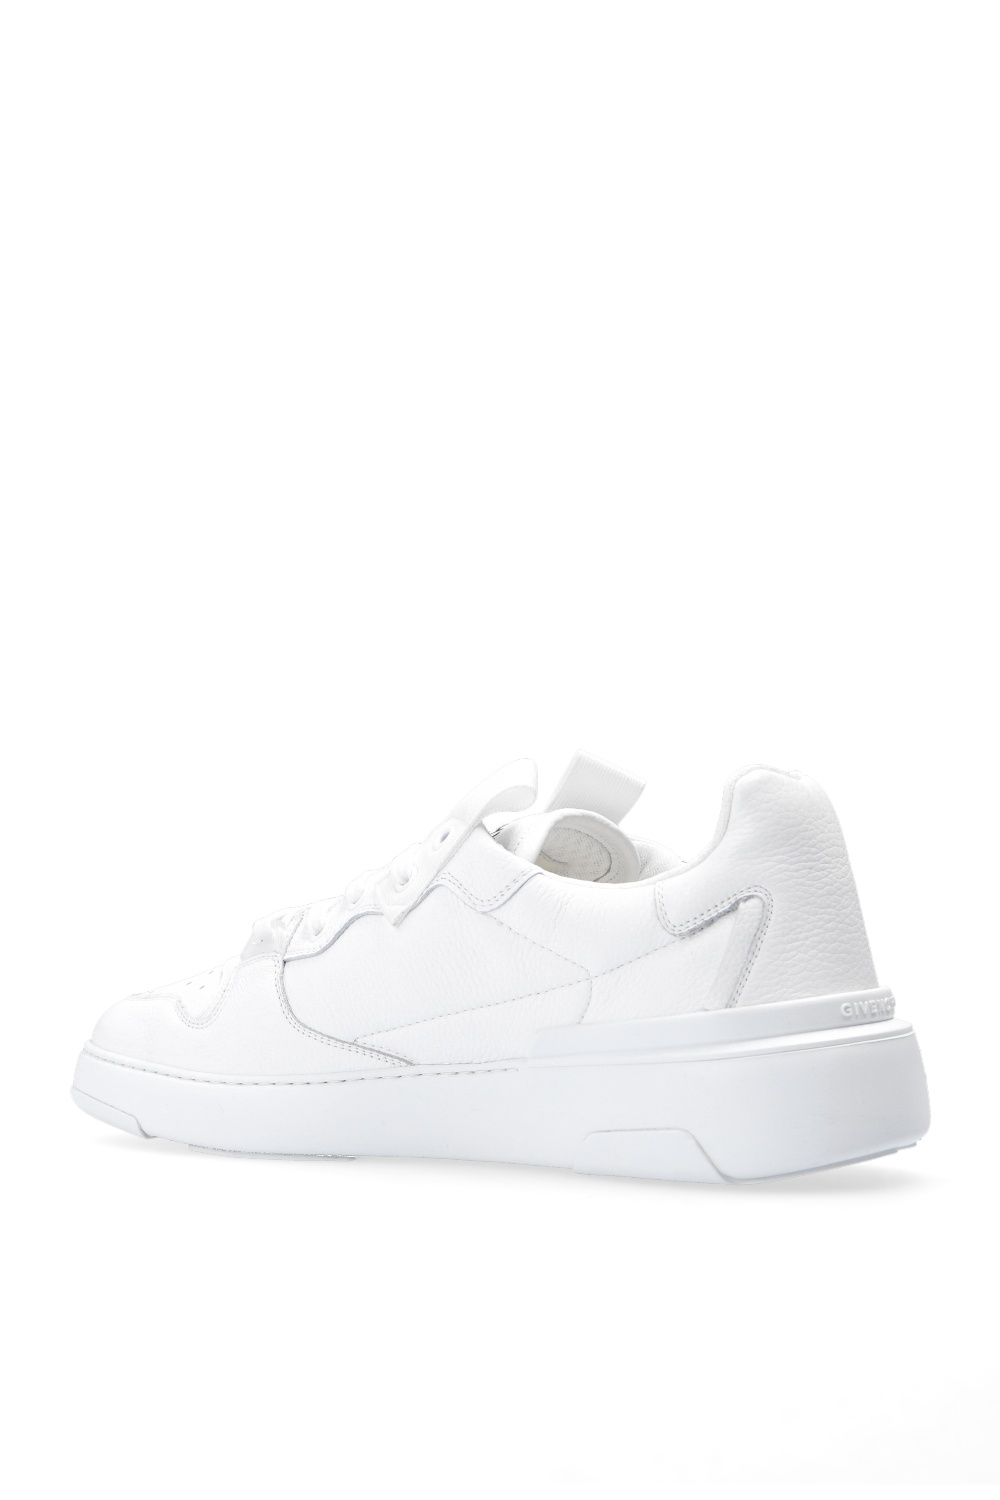 Givenchy ‘Wing’ sneakers